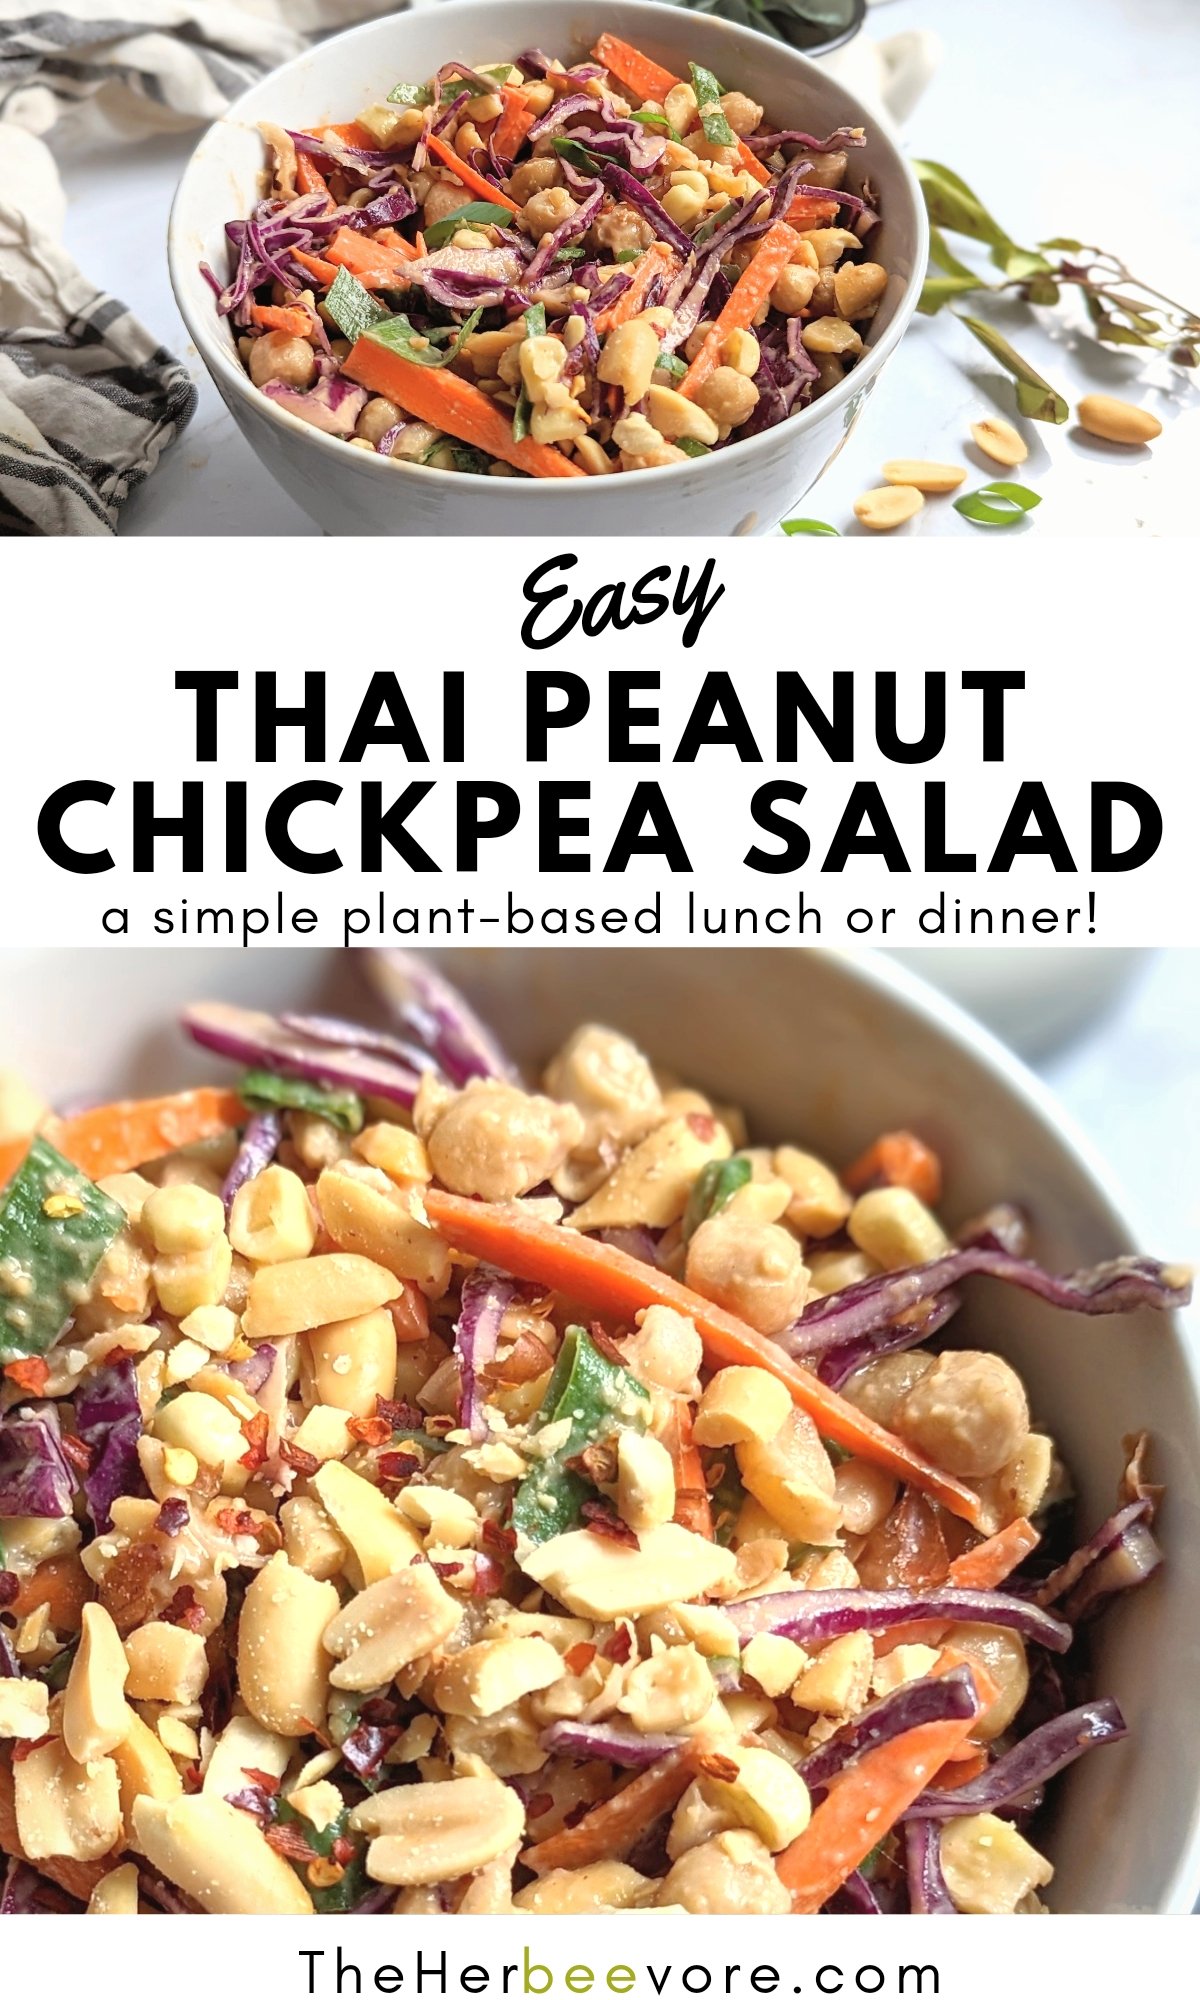 thai peanut chickpea salad with vegan peanut sauce gluten free vegetarian high protein lunch ideas plant based hearty lunch recipes with garbanzo beans cabbage carrots